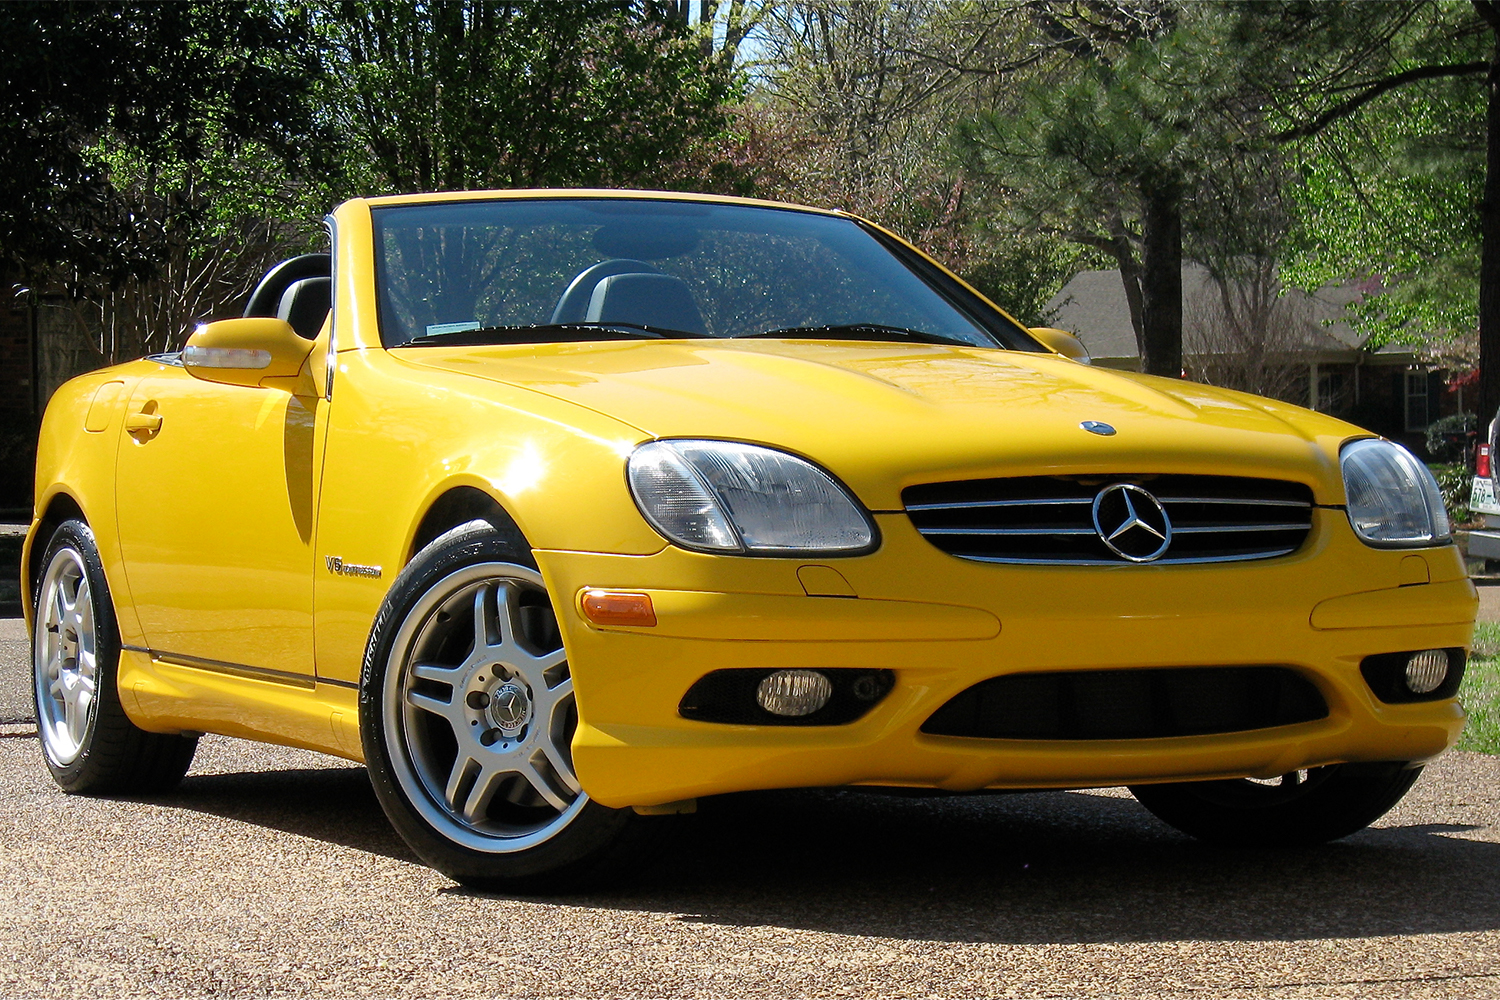 A yellow Mercedes-Benz SLK 32 AMG in a driveway.  It is considered a modern classic car, but shares a platform with something more interesting.